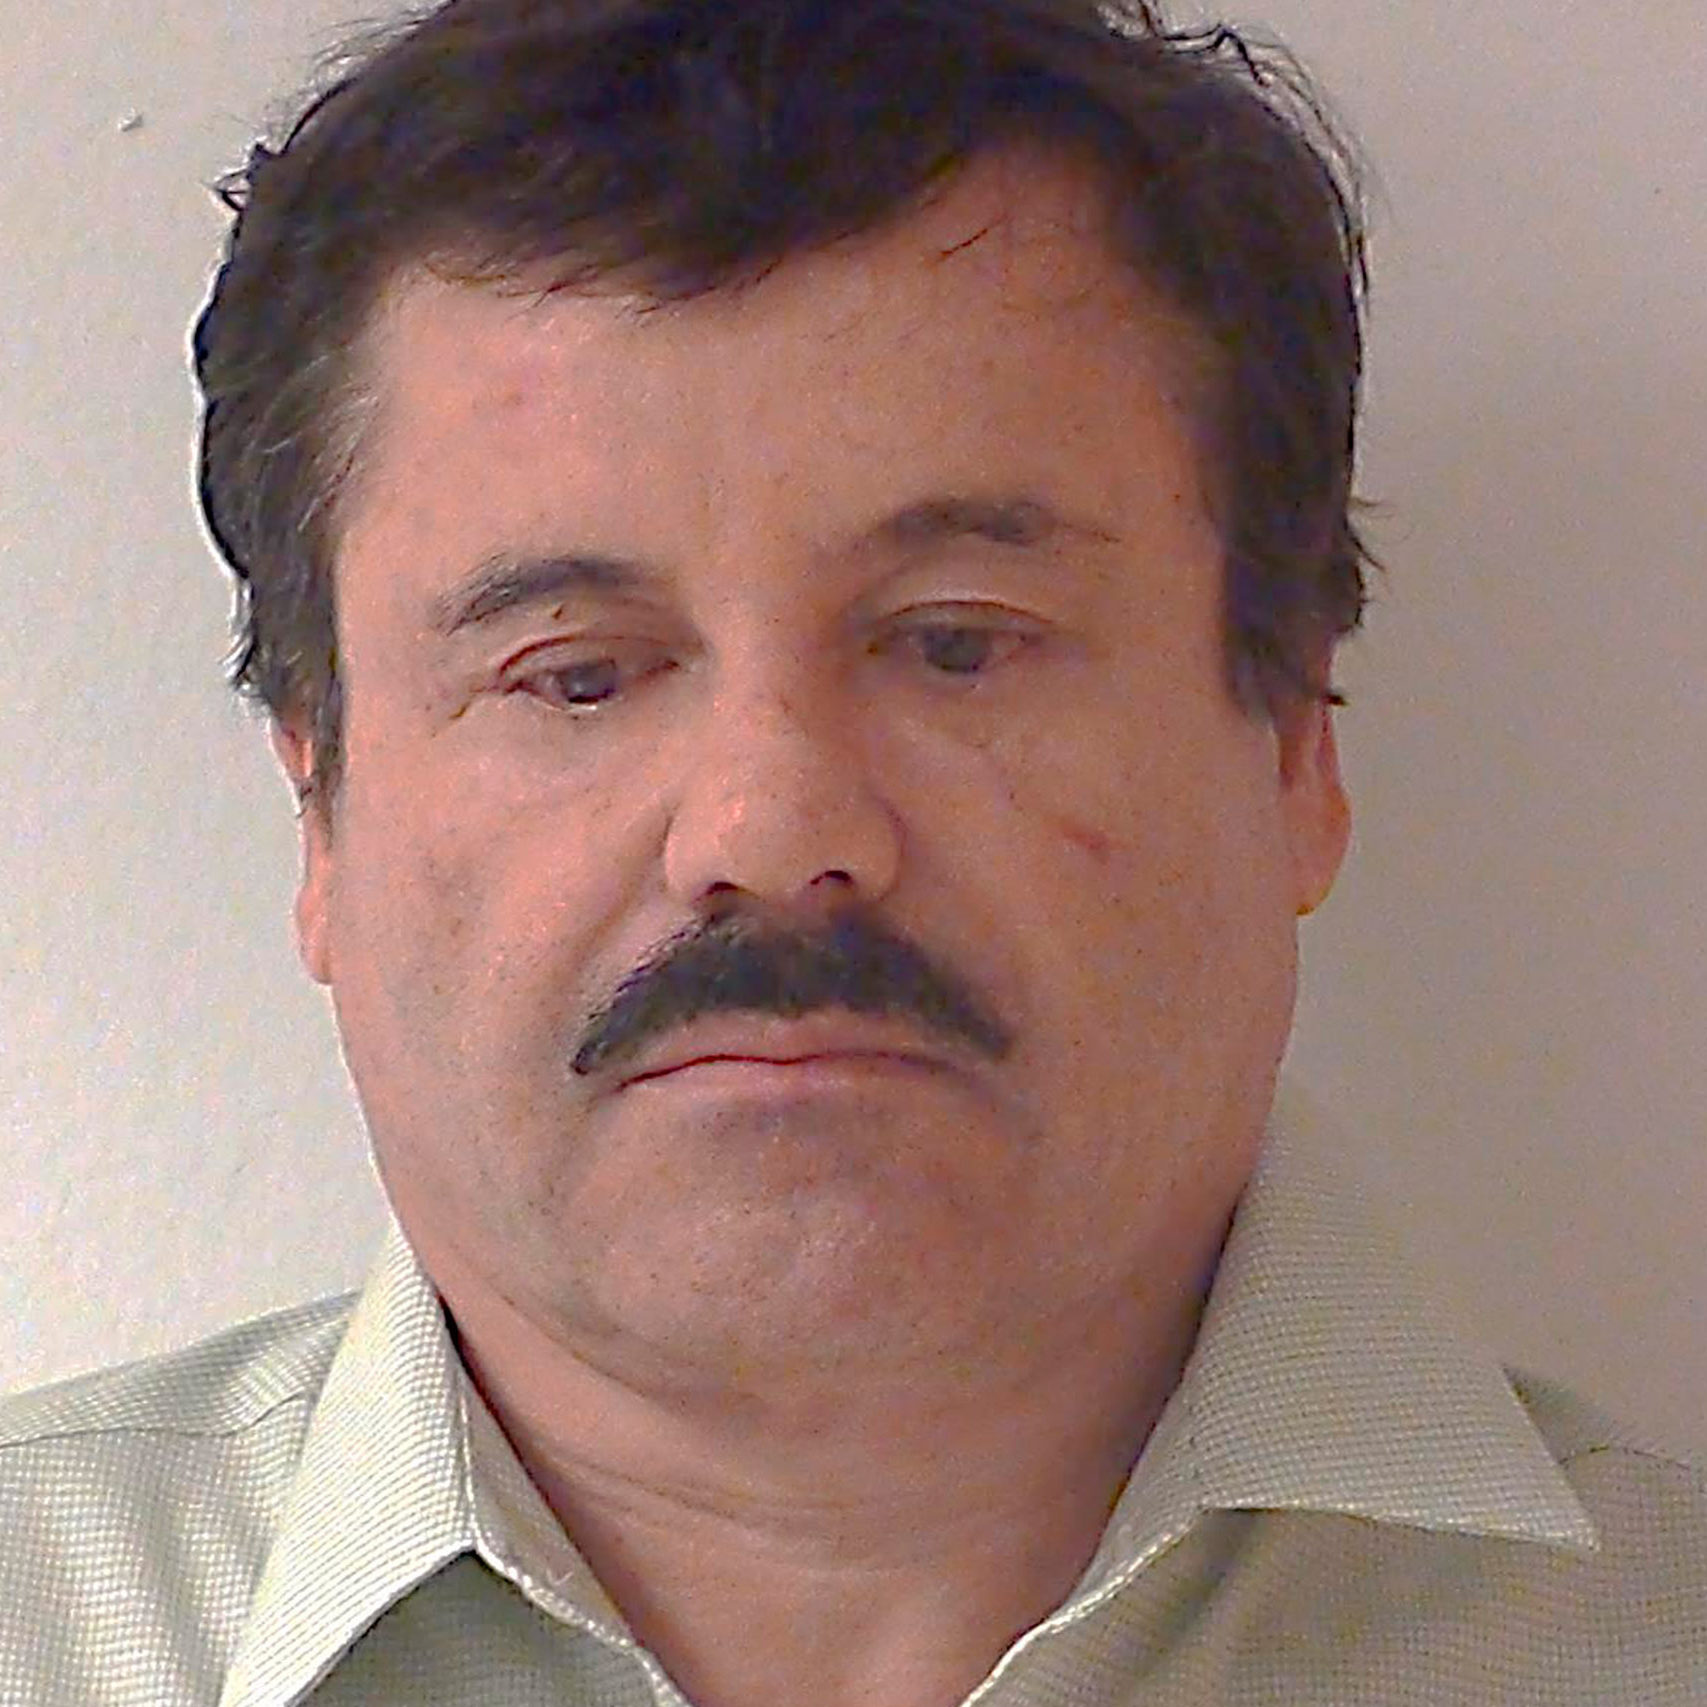 Mexican drug kingpin Joaquin "Shorty" Guzman is seen during his detention in Mexico City, in this undated handout photo provided by Mexico's Attorney General's office (PGR) on February 25, 2014. The identity of Guzman was publicly confirmed by Mexican authorities on February 25, 2014. REUTERS/PGR/Handout via Reuters (MEXICO - Tags: DRUGS SOCIETY CRIME LAW HEADSHOT) ATTENTION EDITORS - THIS IMAGE WAS PROVIDED BY A THIRD PARTY. FOR EDITORIAL USE ONLY. NOT FOR SALE FOR MARKETING OR ADVERTISING CAMPAIGNS. THIS PICTURE IS DISTRIBUTED EXACTLY AS RECEIVED BY REUTERS, AS A SERVICE TO CLIENTS - RTR3FQMJ